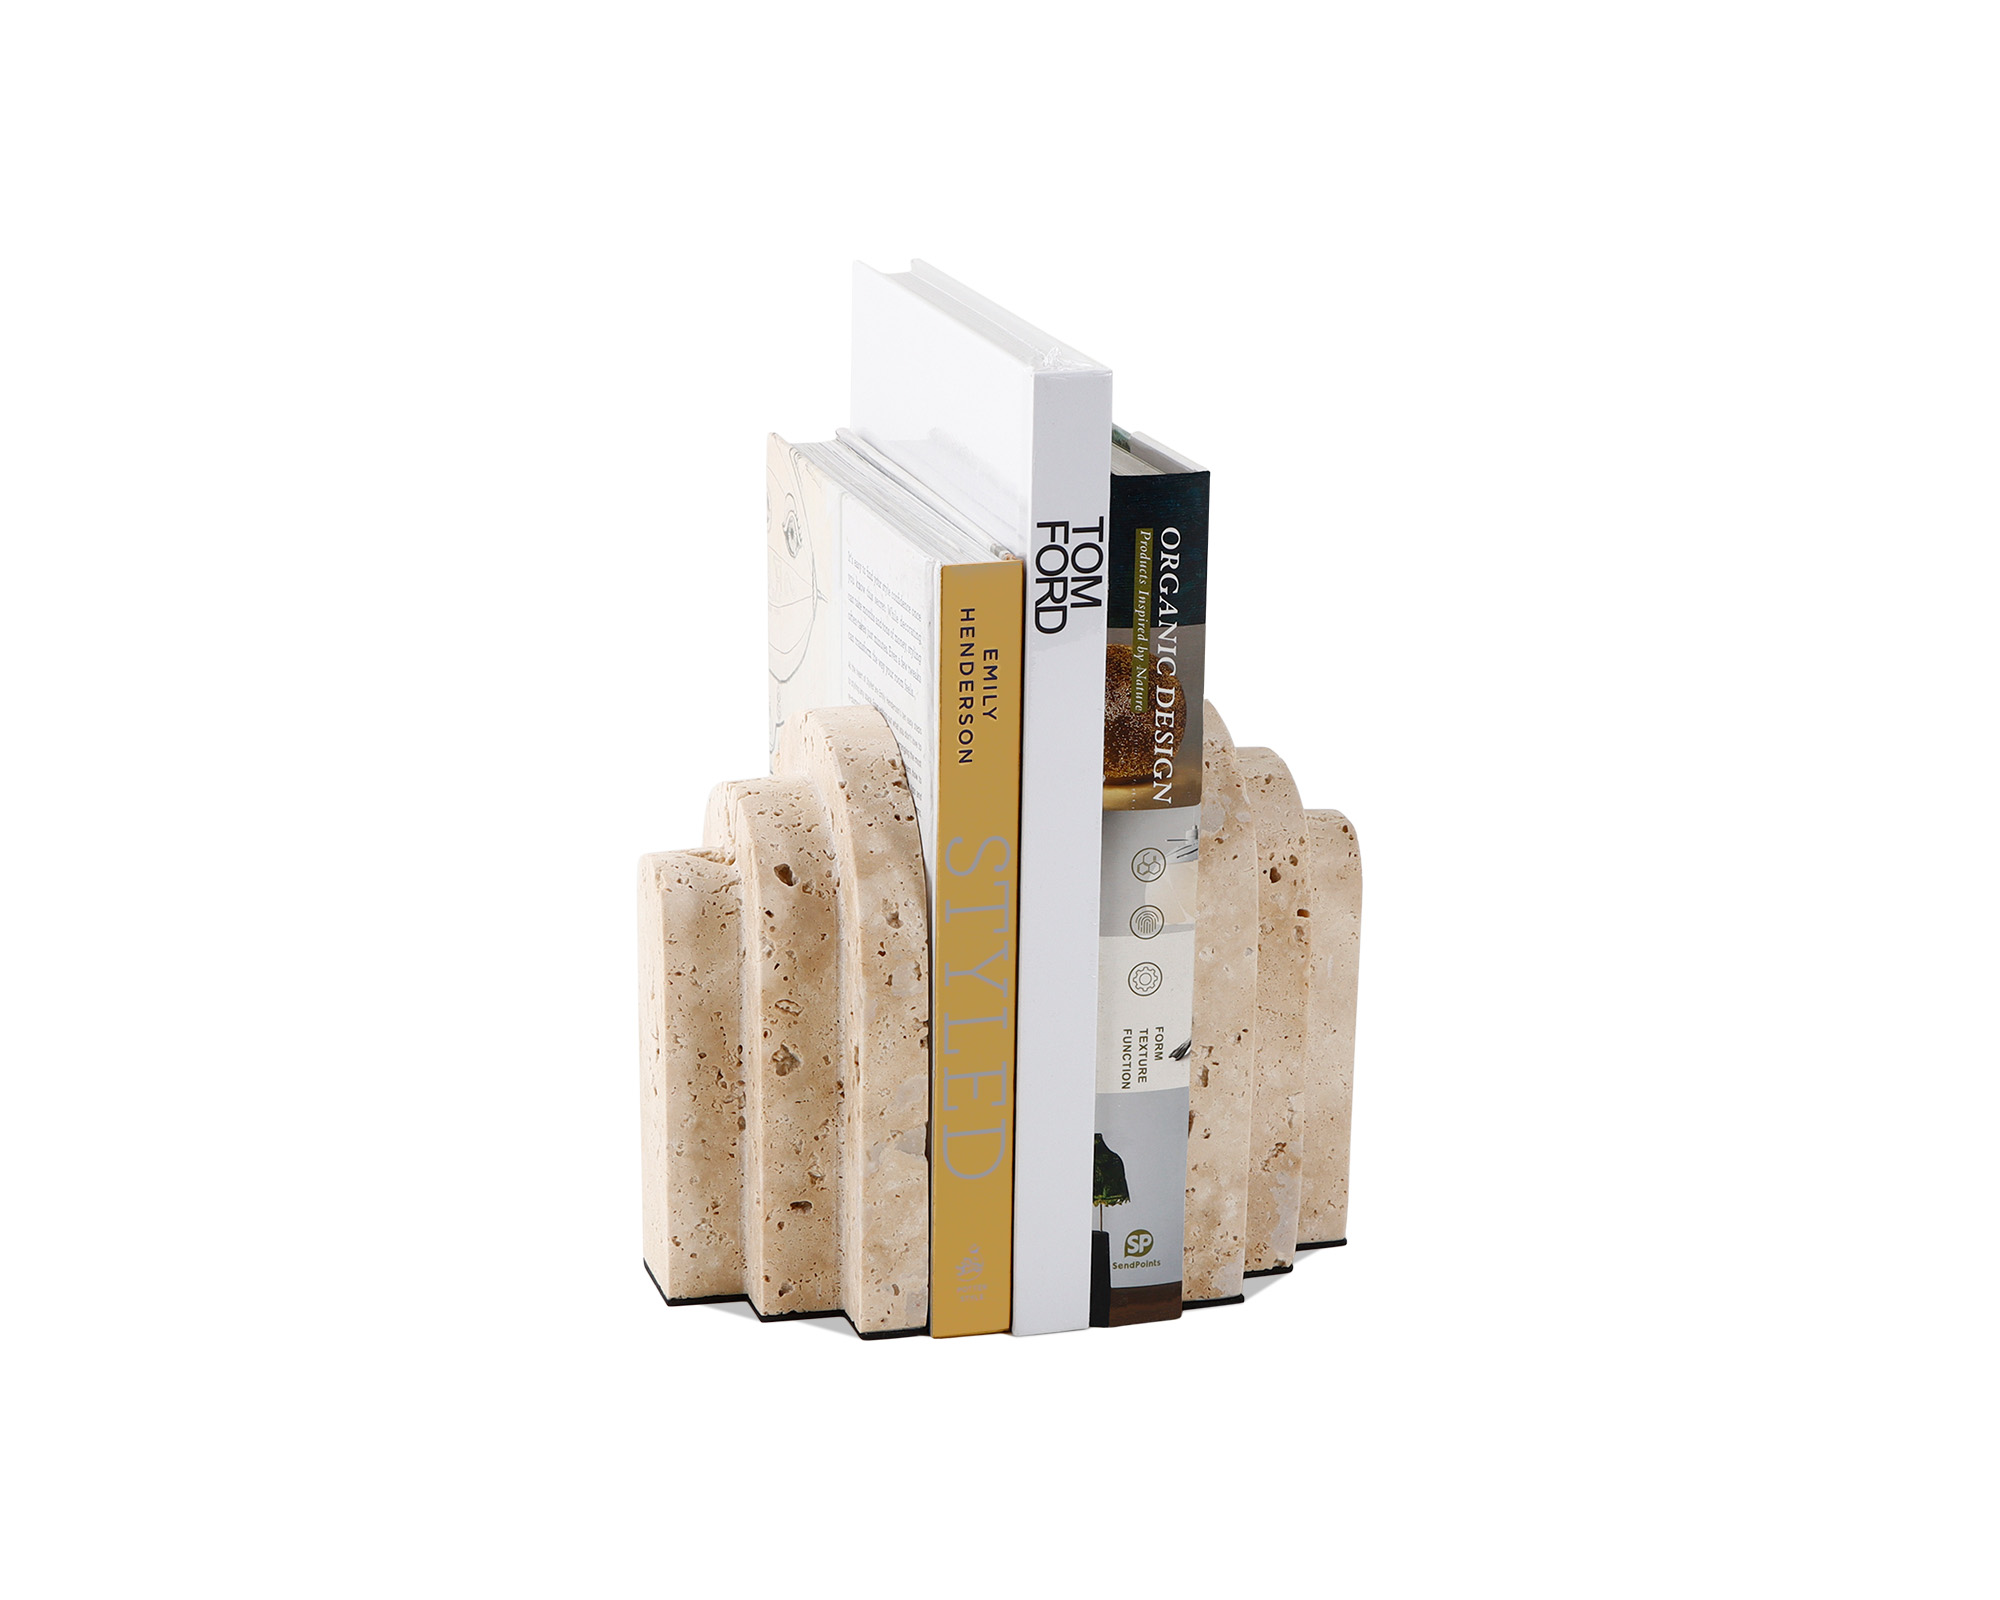 Liang & Eimil Beige Marble Empire Bookends